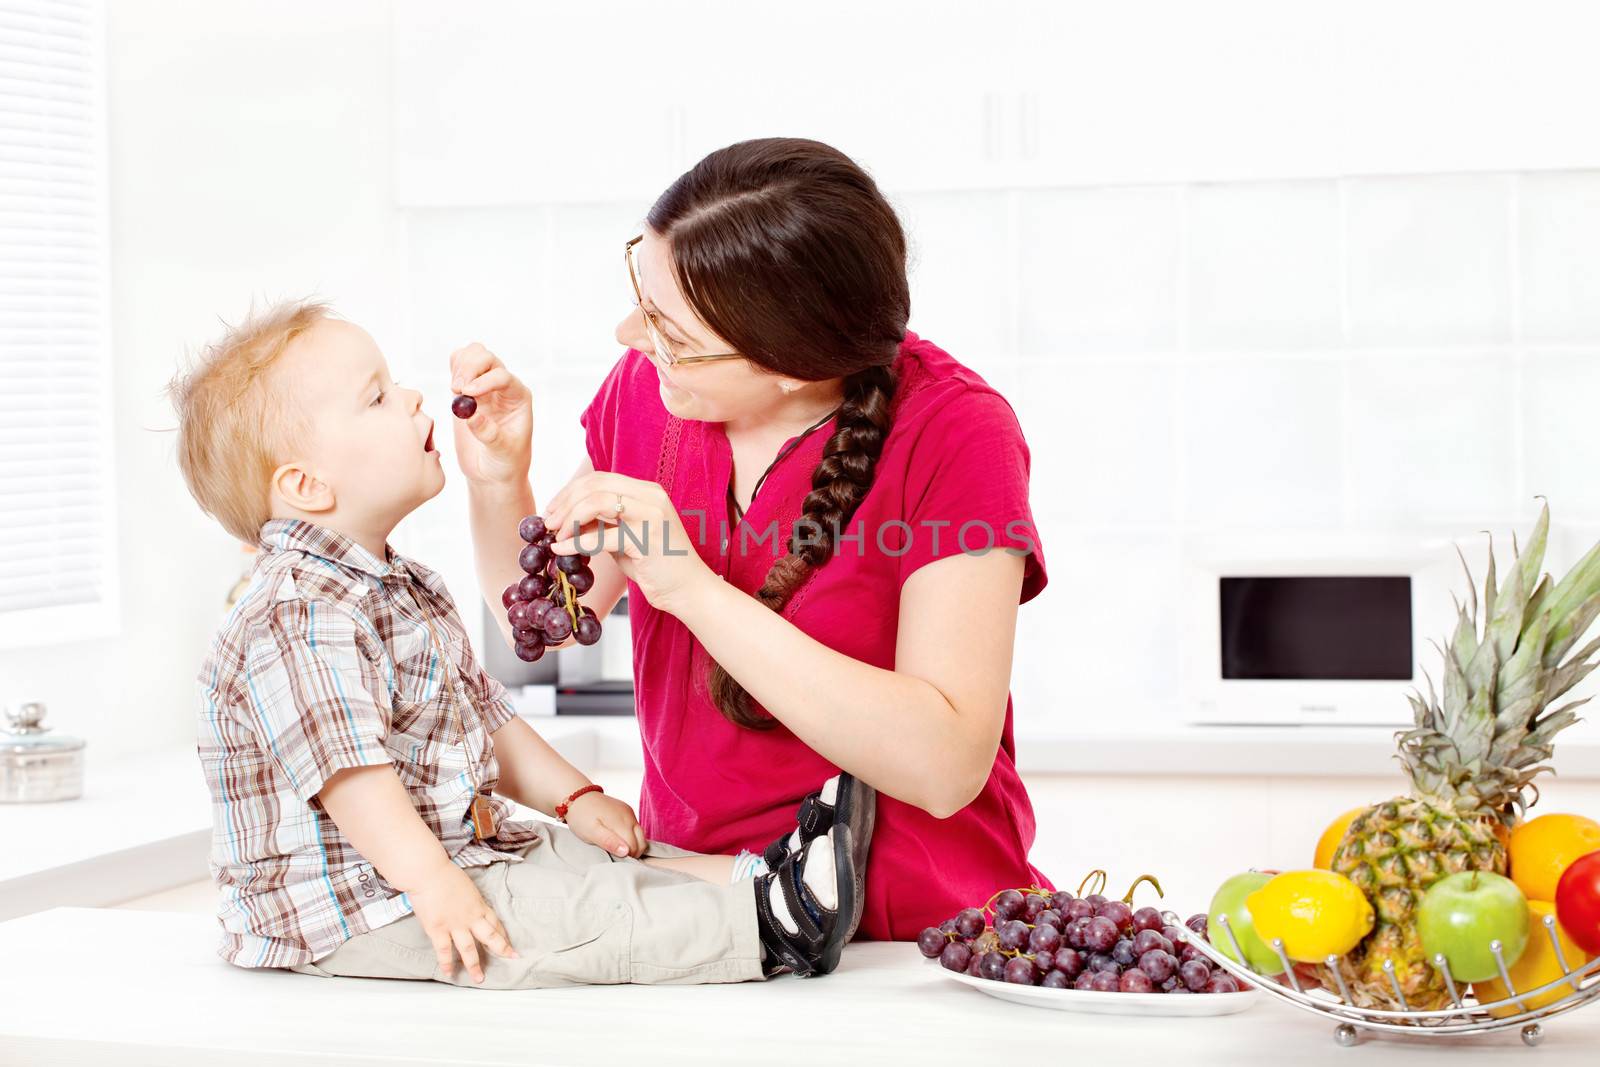 Mother feeding child with grapes by imarin